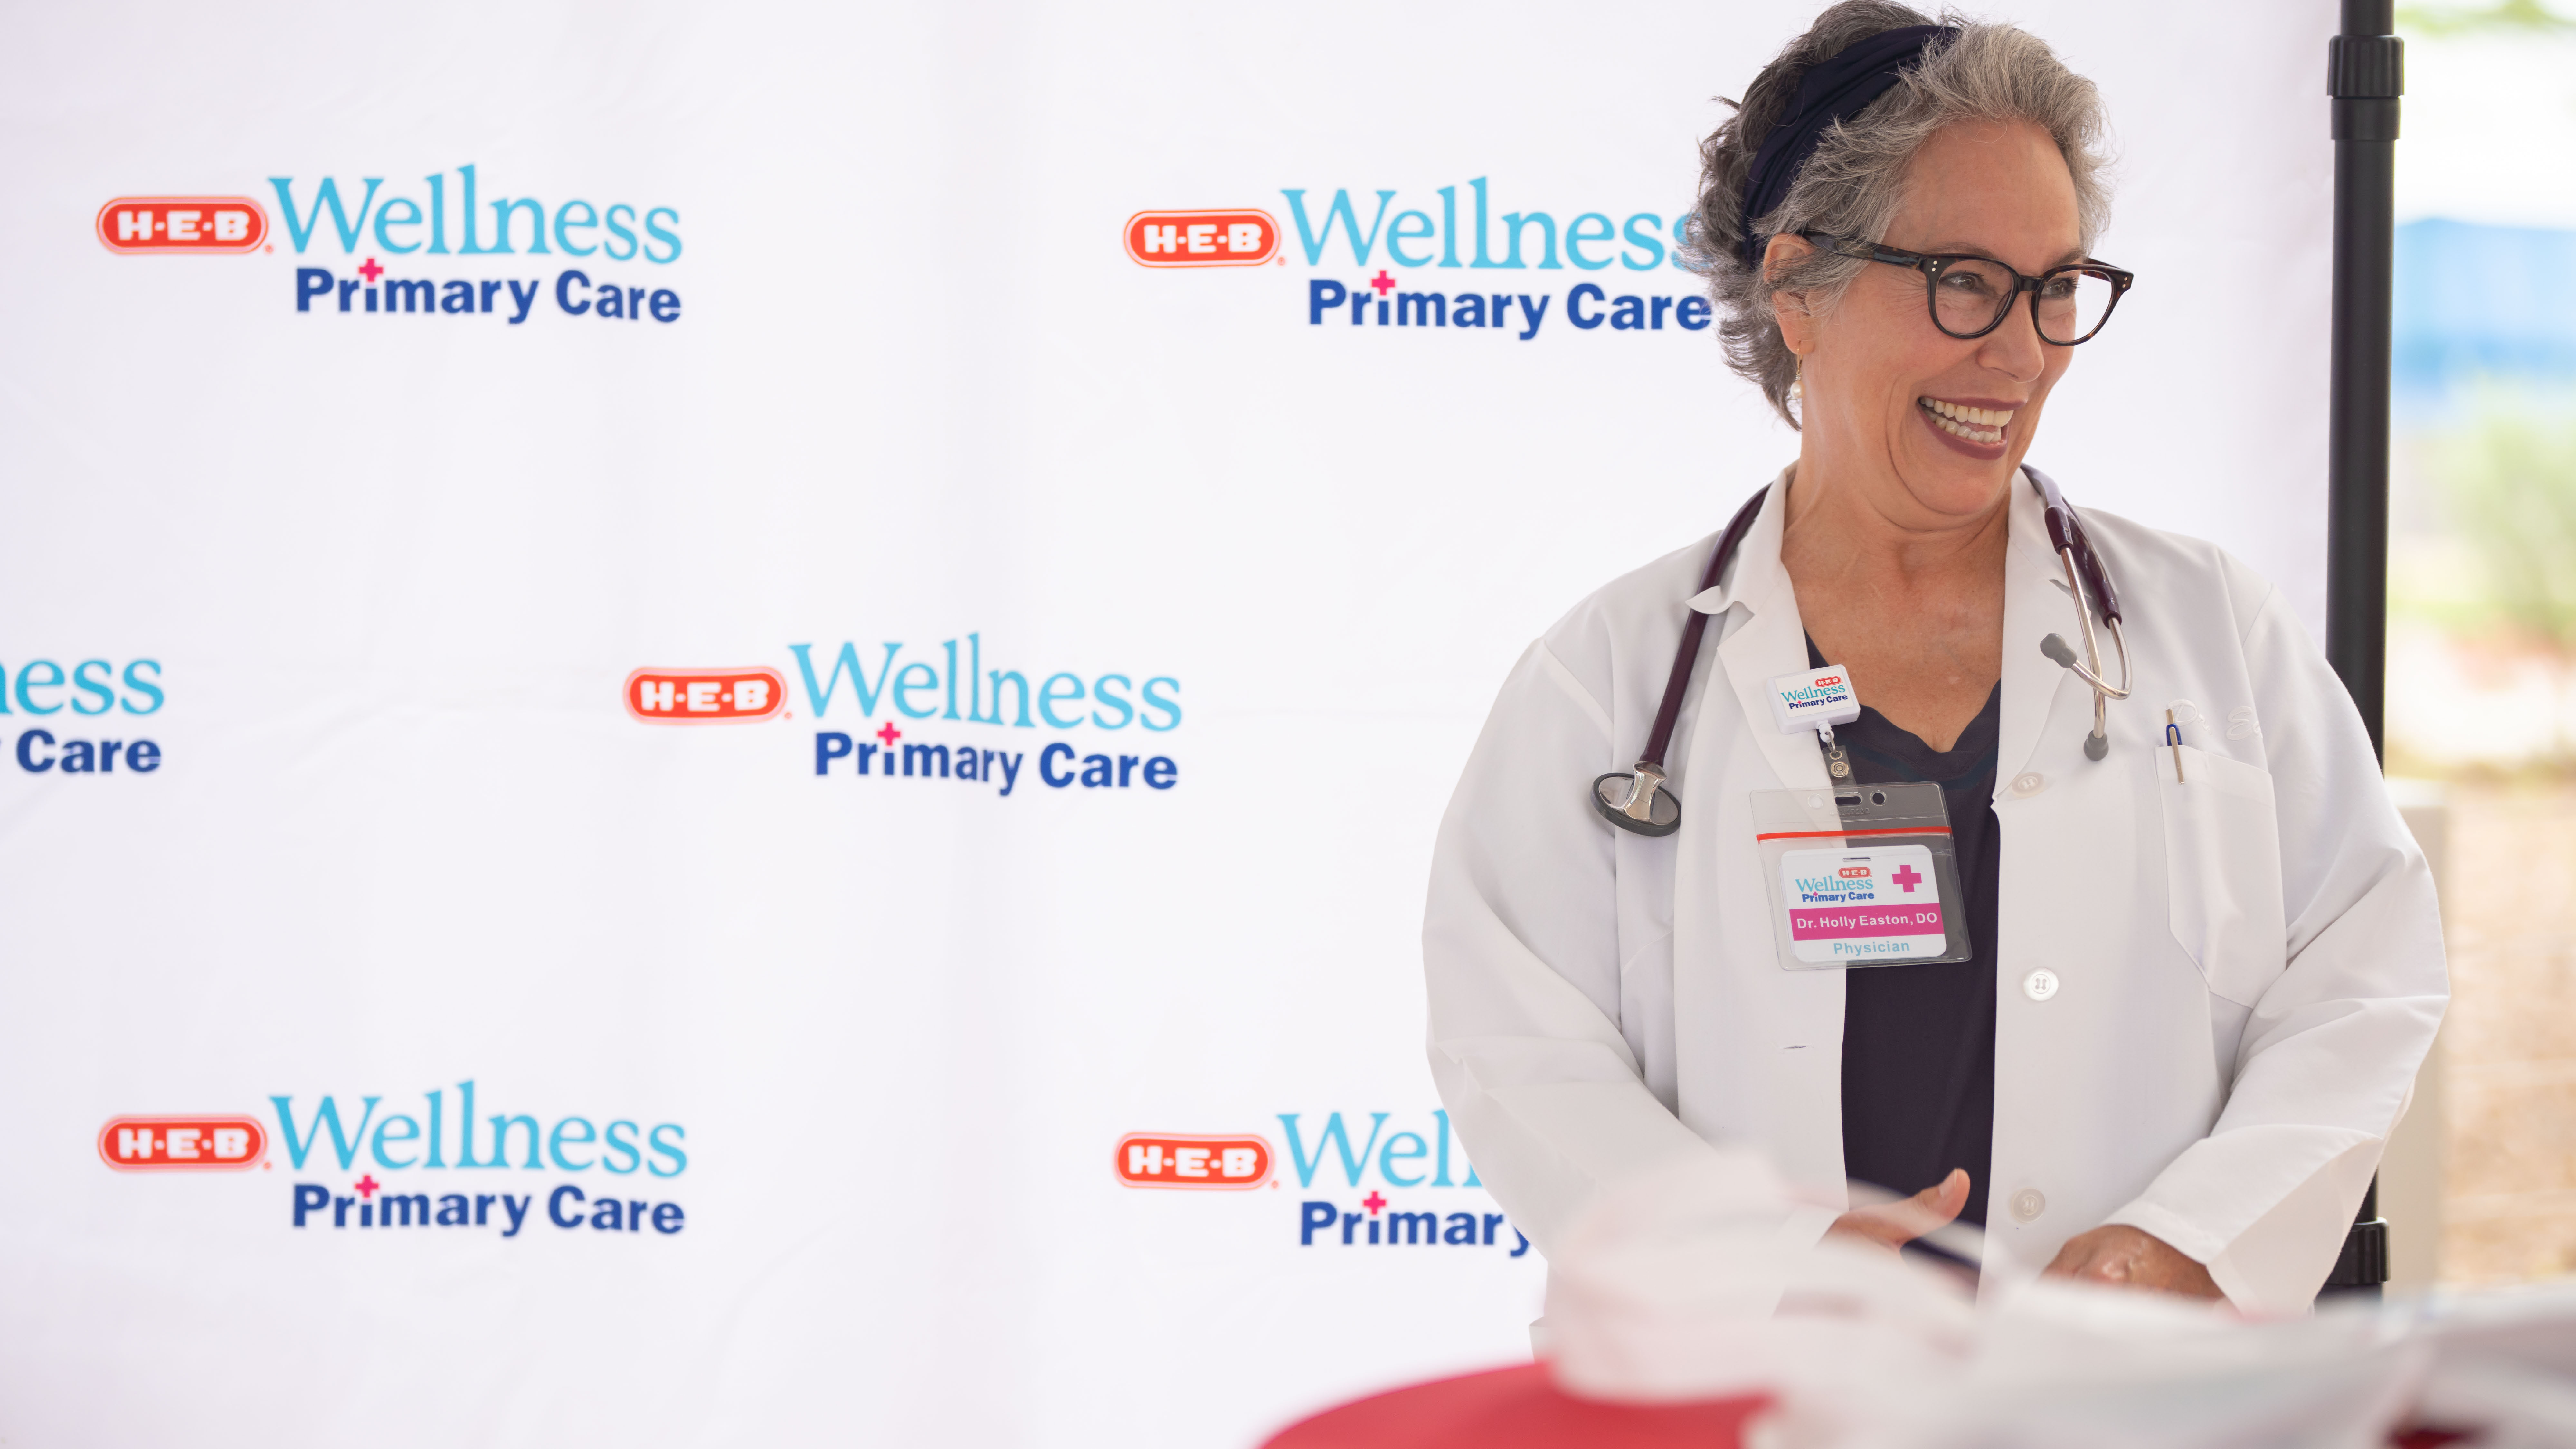 H E B Introduces H E B Wellness With Launch Of Primary Care Clinics In